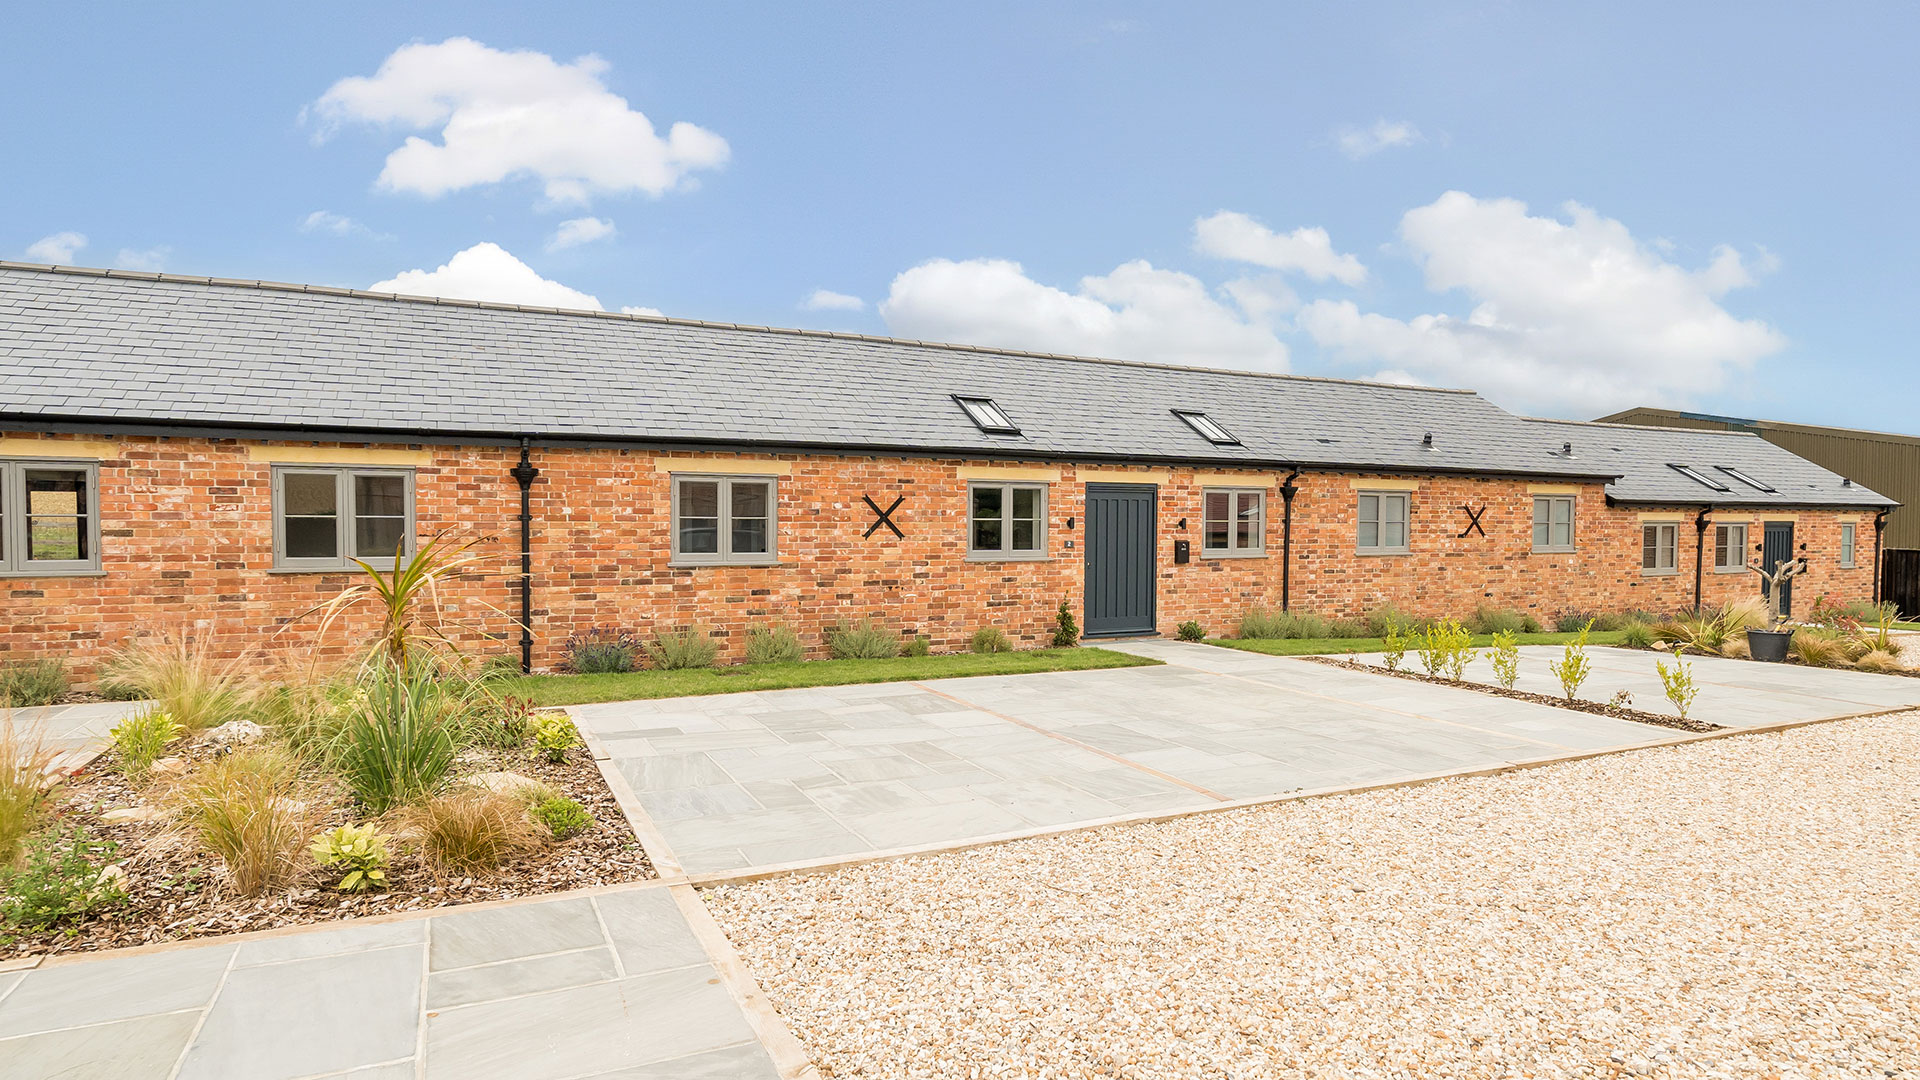 converted barns into housing with red brick